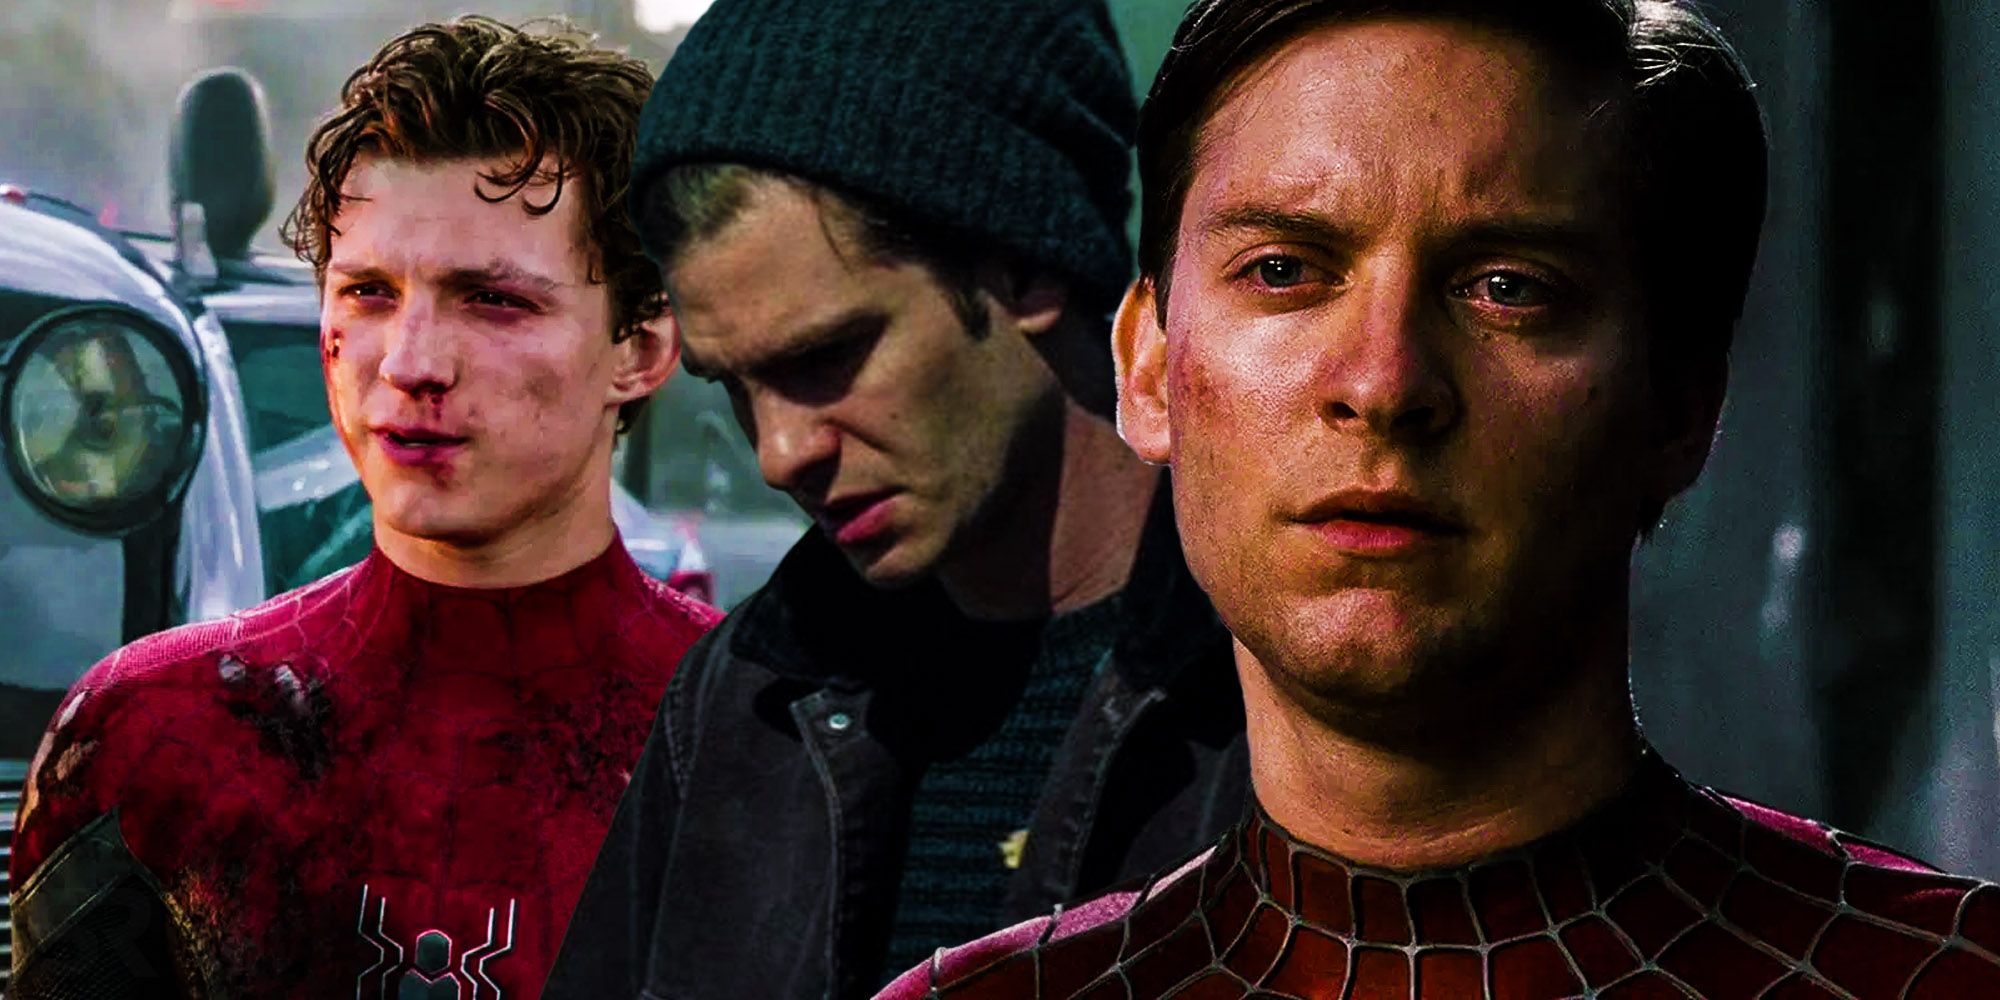 Multiverse peter parkers mentor MCU spiderman tom holland tobey maguire andrew garfield